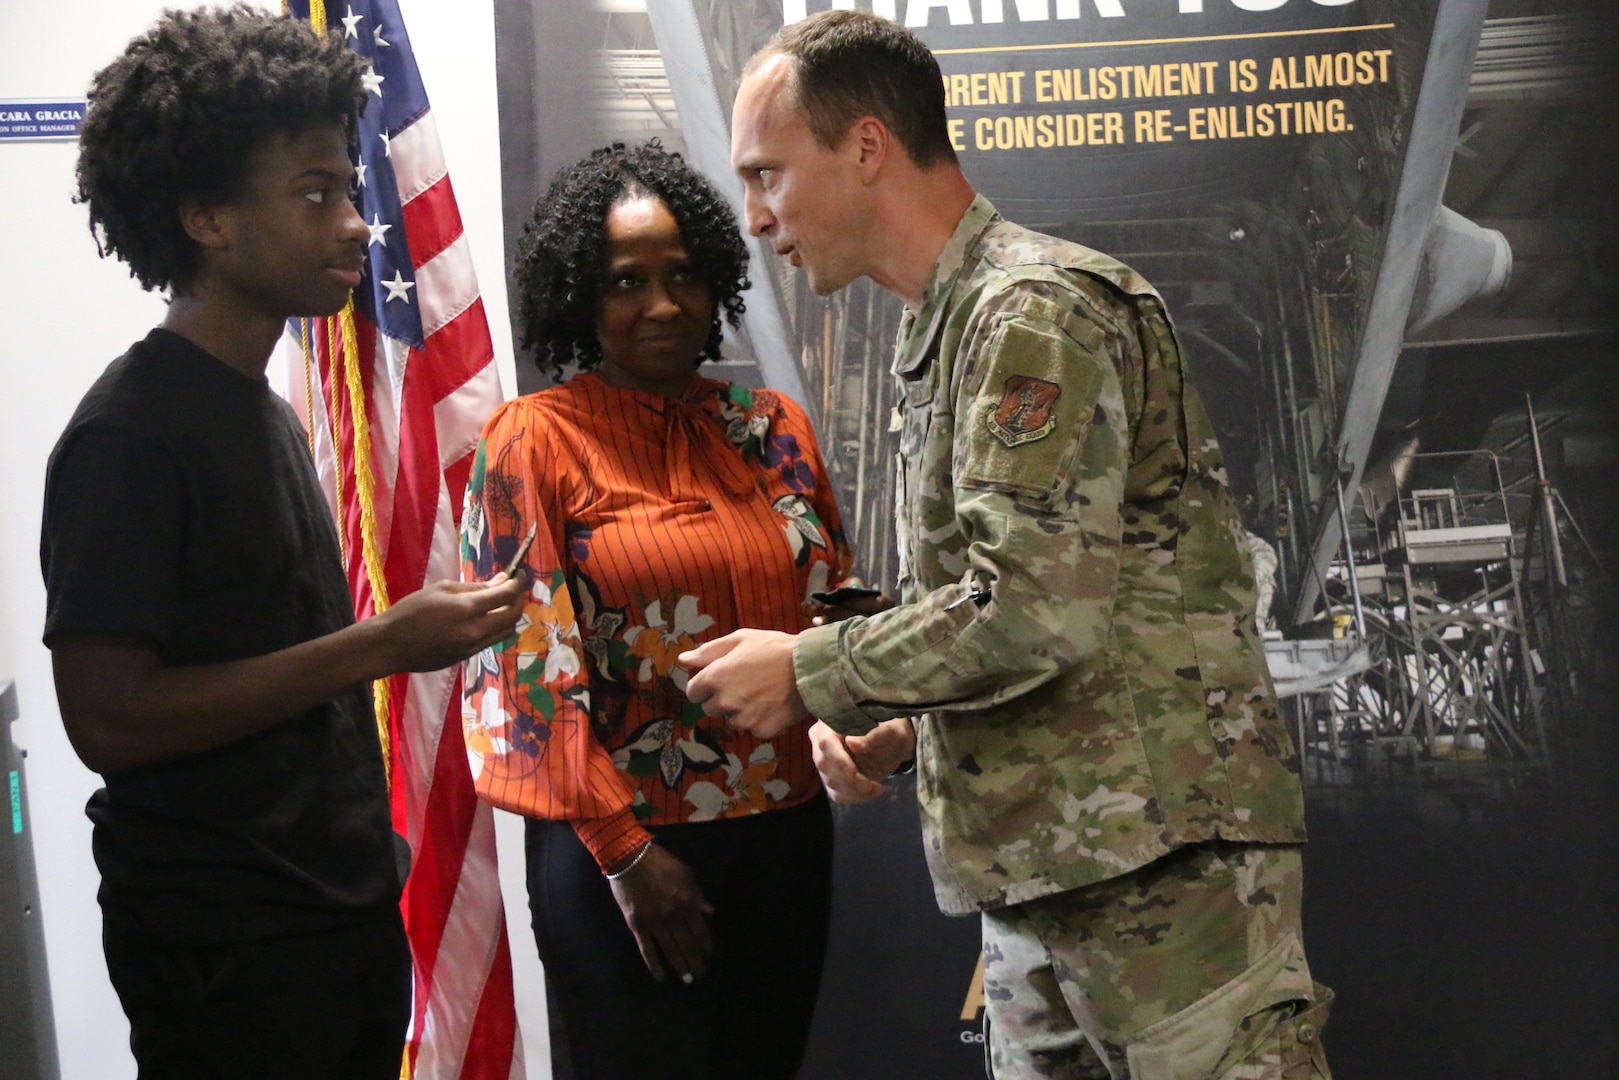 Tobye McMillian and her son, Emmanuel McClain, take the oath of enlistment into the Virginia Air National Guard from Col. Brock Lange, commander of the Virginia ANG’s 192nd Wing, Sept. 18, 2023, at Joint Base Langley-Eustis in Hampton, Virginia. McMillian, who is rejoining the military after an 18-year break in service, will serve in the Virginia Beach-based 203rd Rapid Engineer Deployable Heavy Operational Repair Squadron Engineers, or RED HORSE. After completing Air Force Basic Military Training and technical school, McClain will serve with the Langley-based 192nd Maintenance Group.